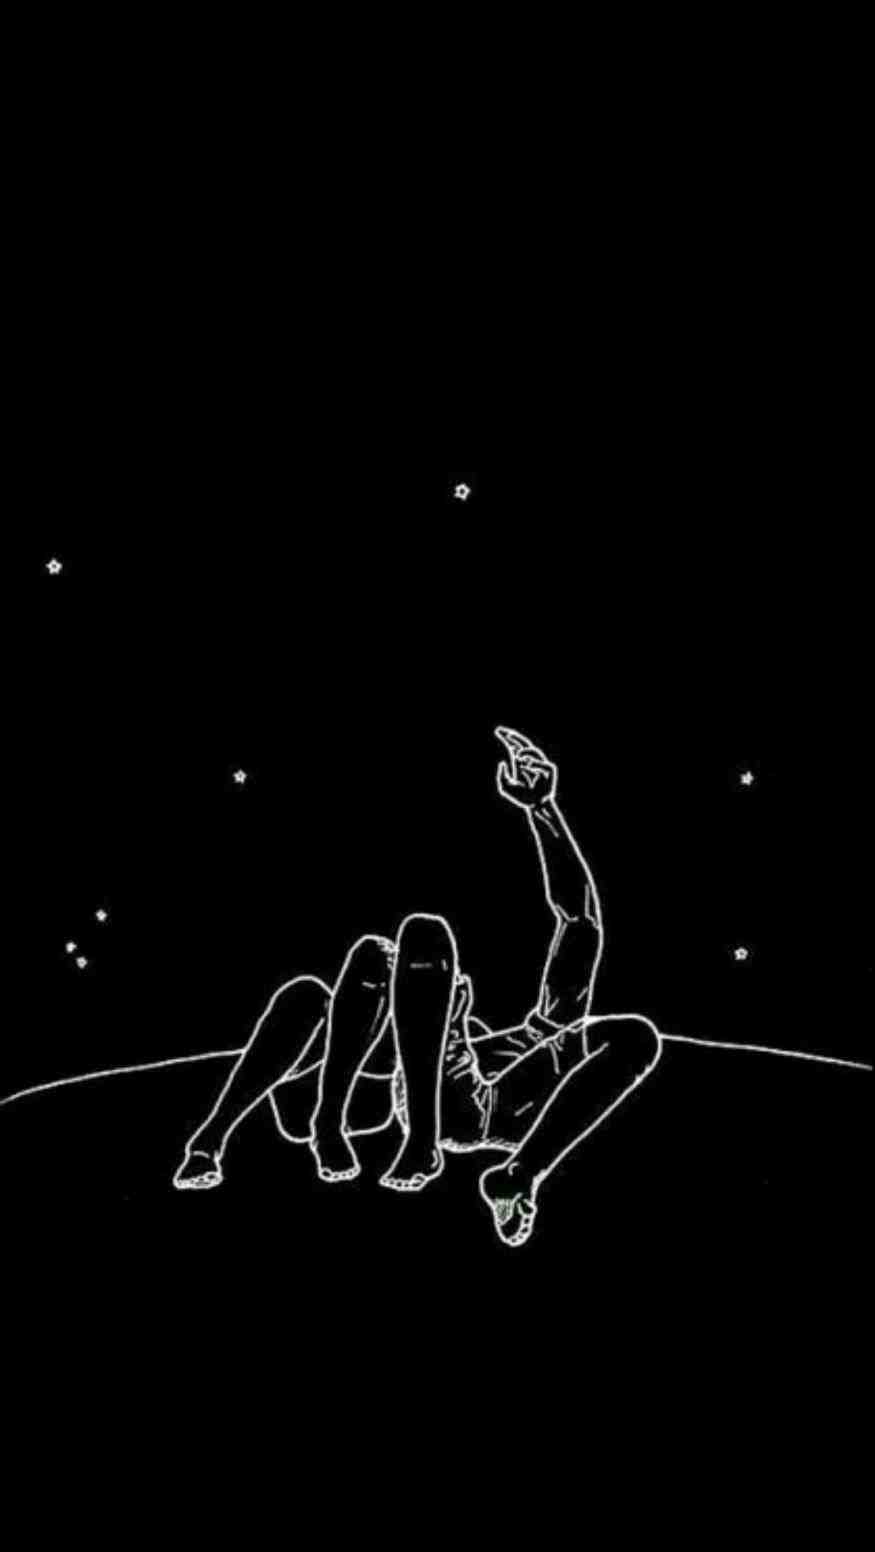 A couple sitting on the moon with the guy holding a bottle of wine - Sad